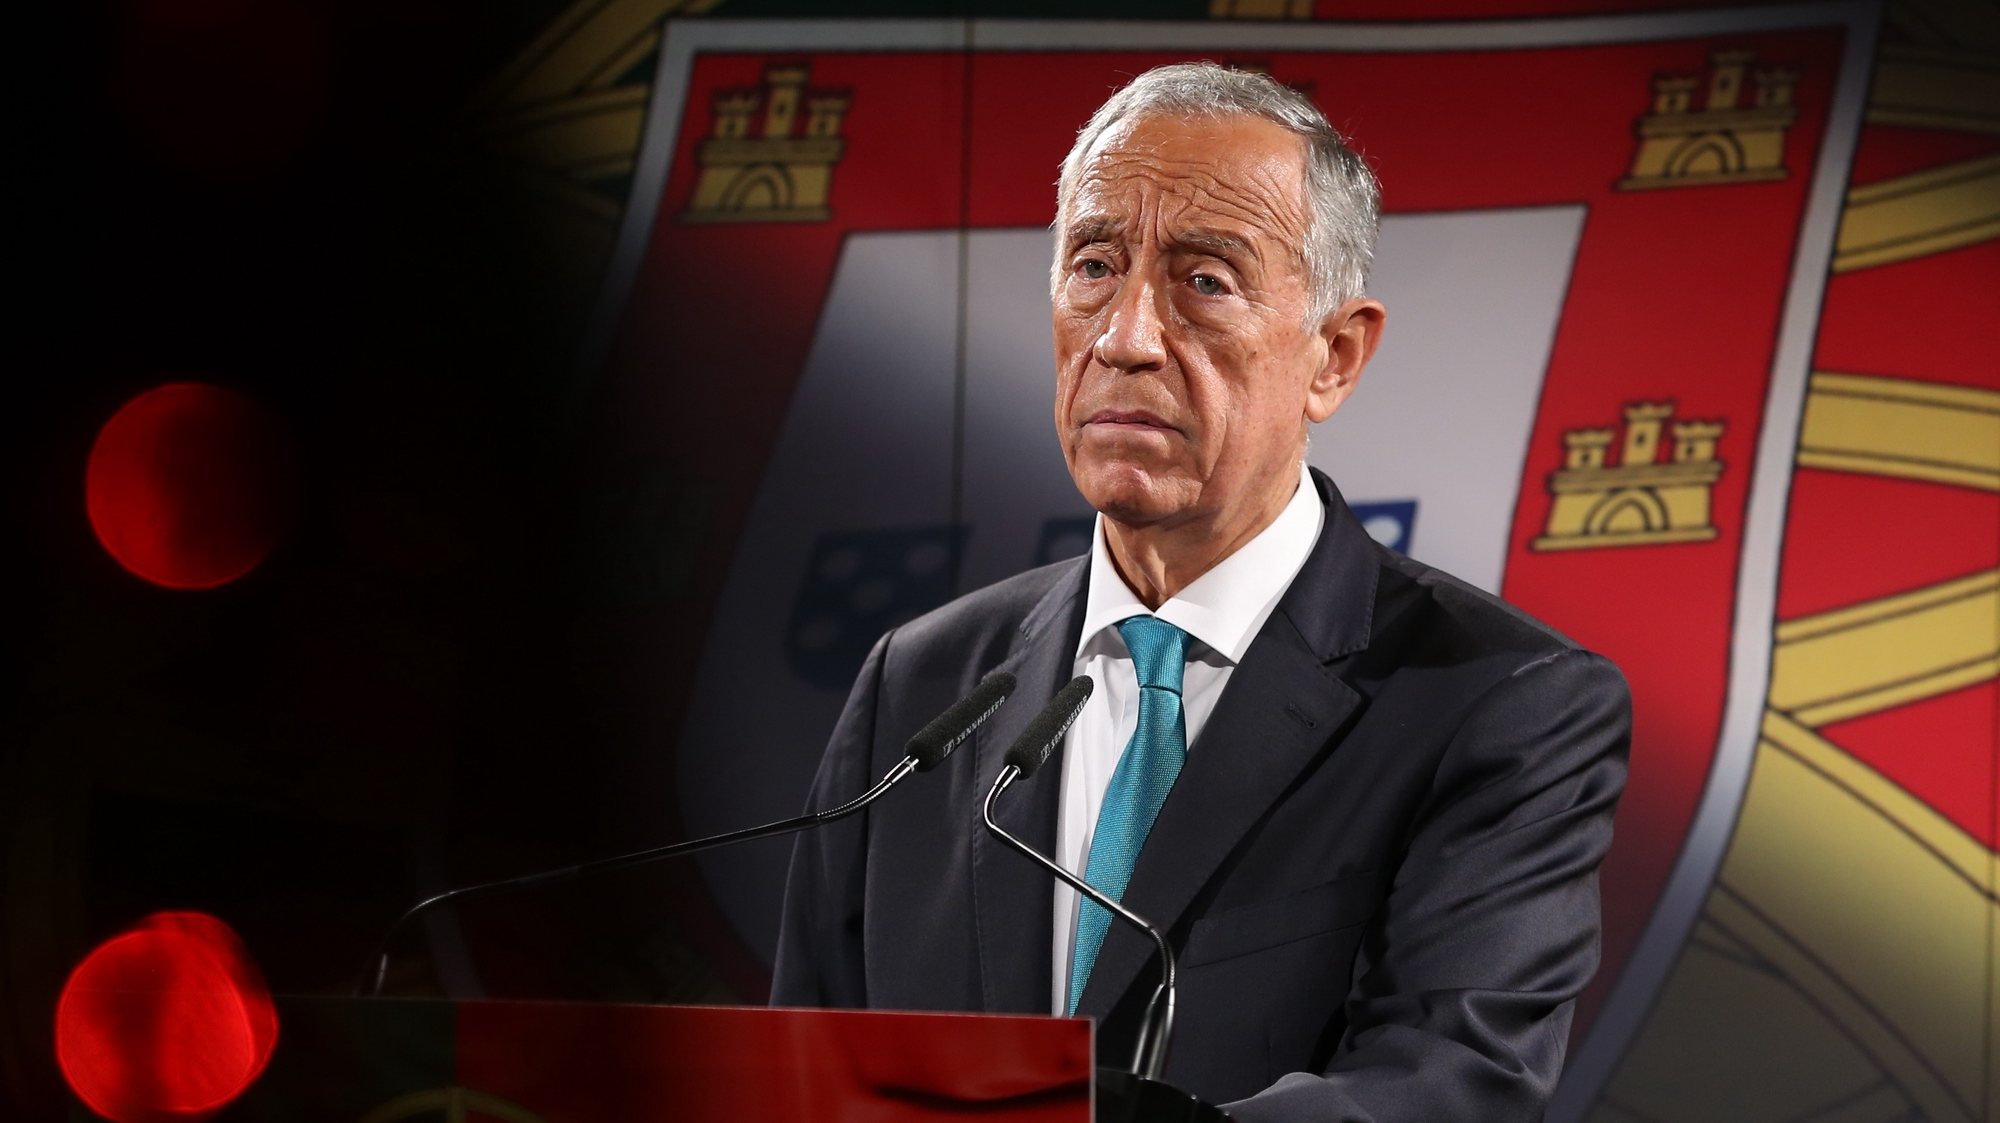 epa08868797 Portugal&#039;s President Marcelo Rebelo de Sousa, during the announcement of his decision to  run again for Portugal&#039;s Head of State in the elections of 24 January 2021, in Lisbon, Portugal, 07 December 2020. Almost 72 years old, on 12 December, Marcelo Rebelo de Sousa was elected President of the Republic in the first round of elections on 24 January 2016, with 52% of the vote.  EPA/MANUEL DE ALMEIDA / POOL